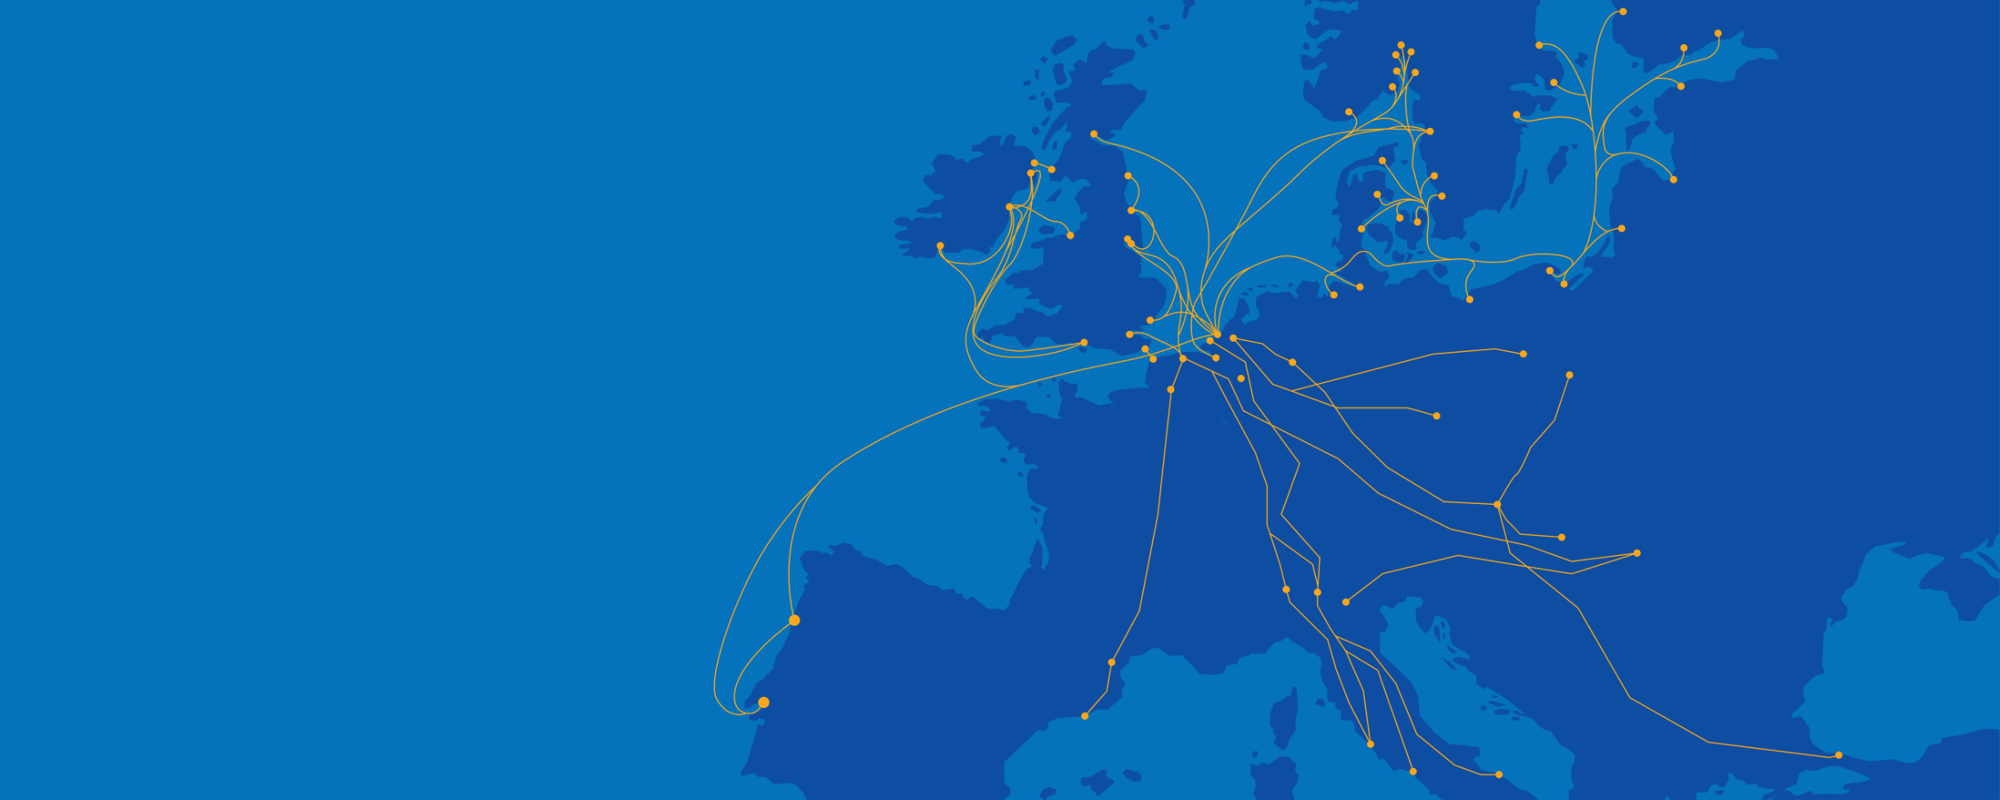 Long - PO Ferrymasters combined network (2500 × 1000 px)